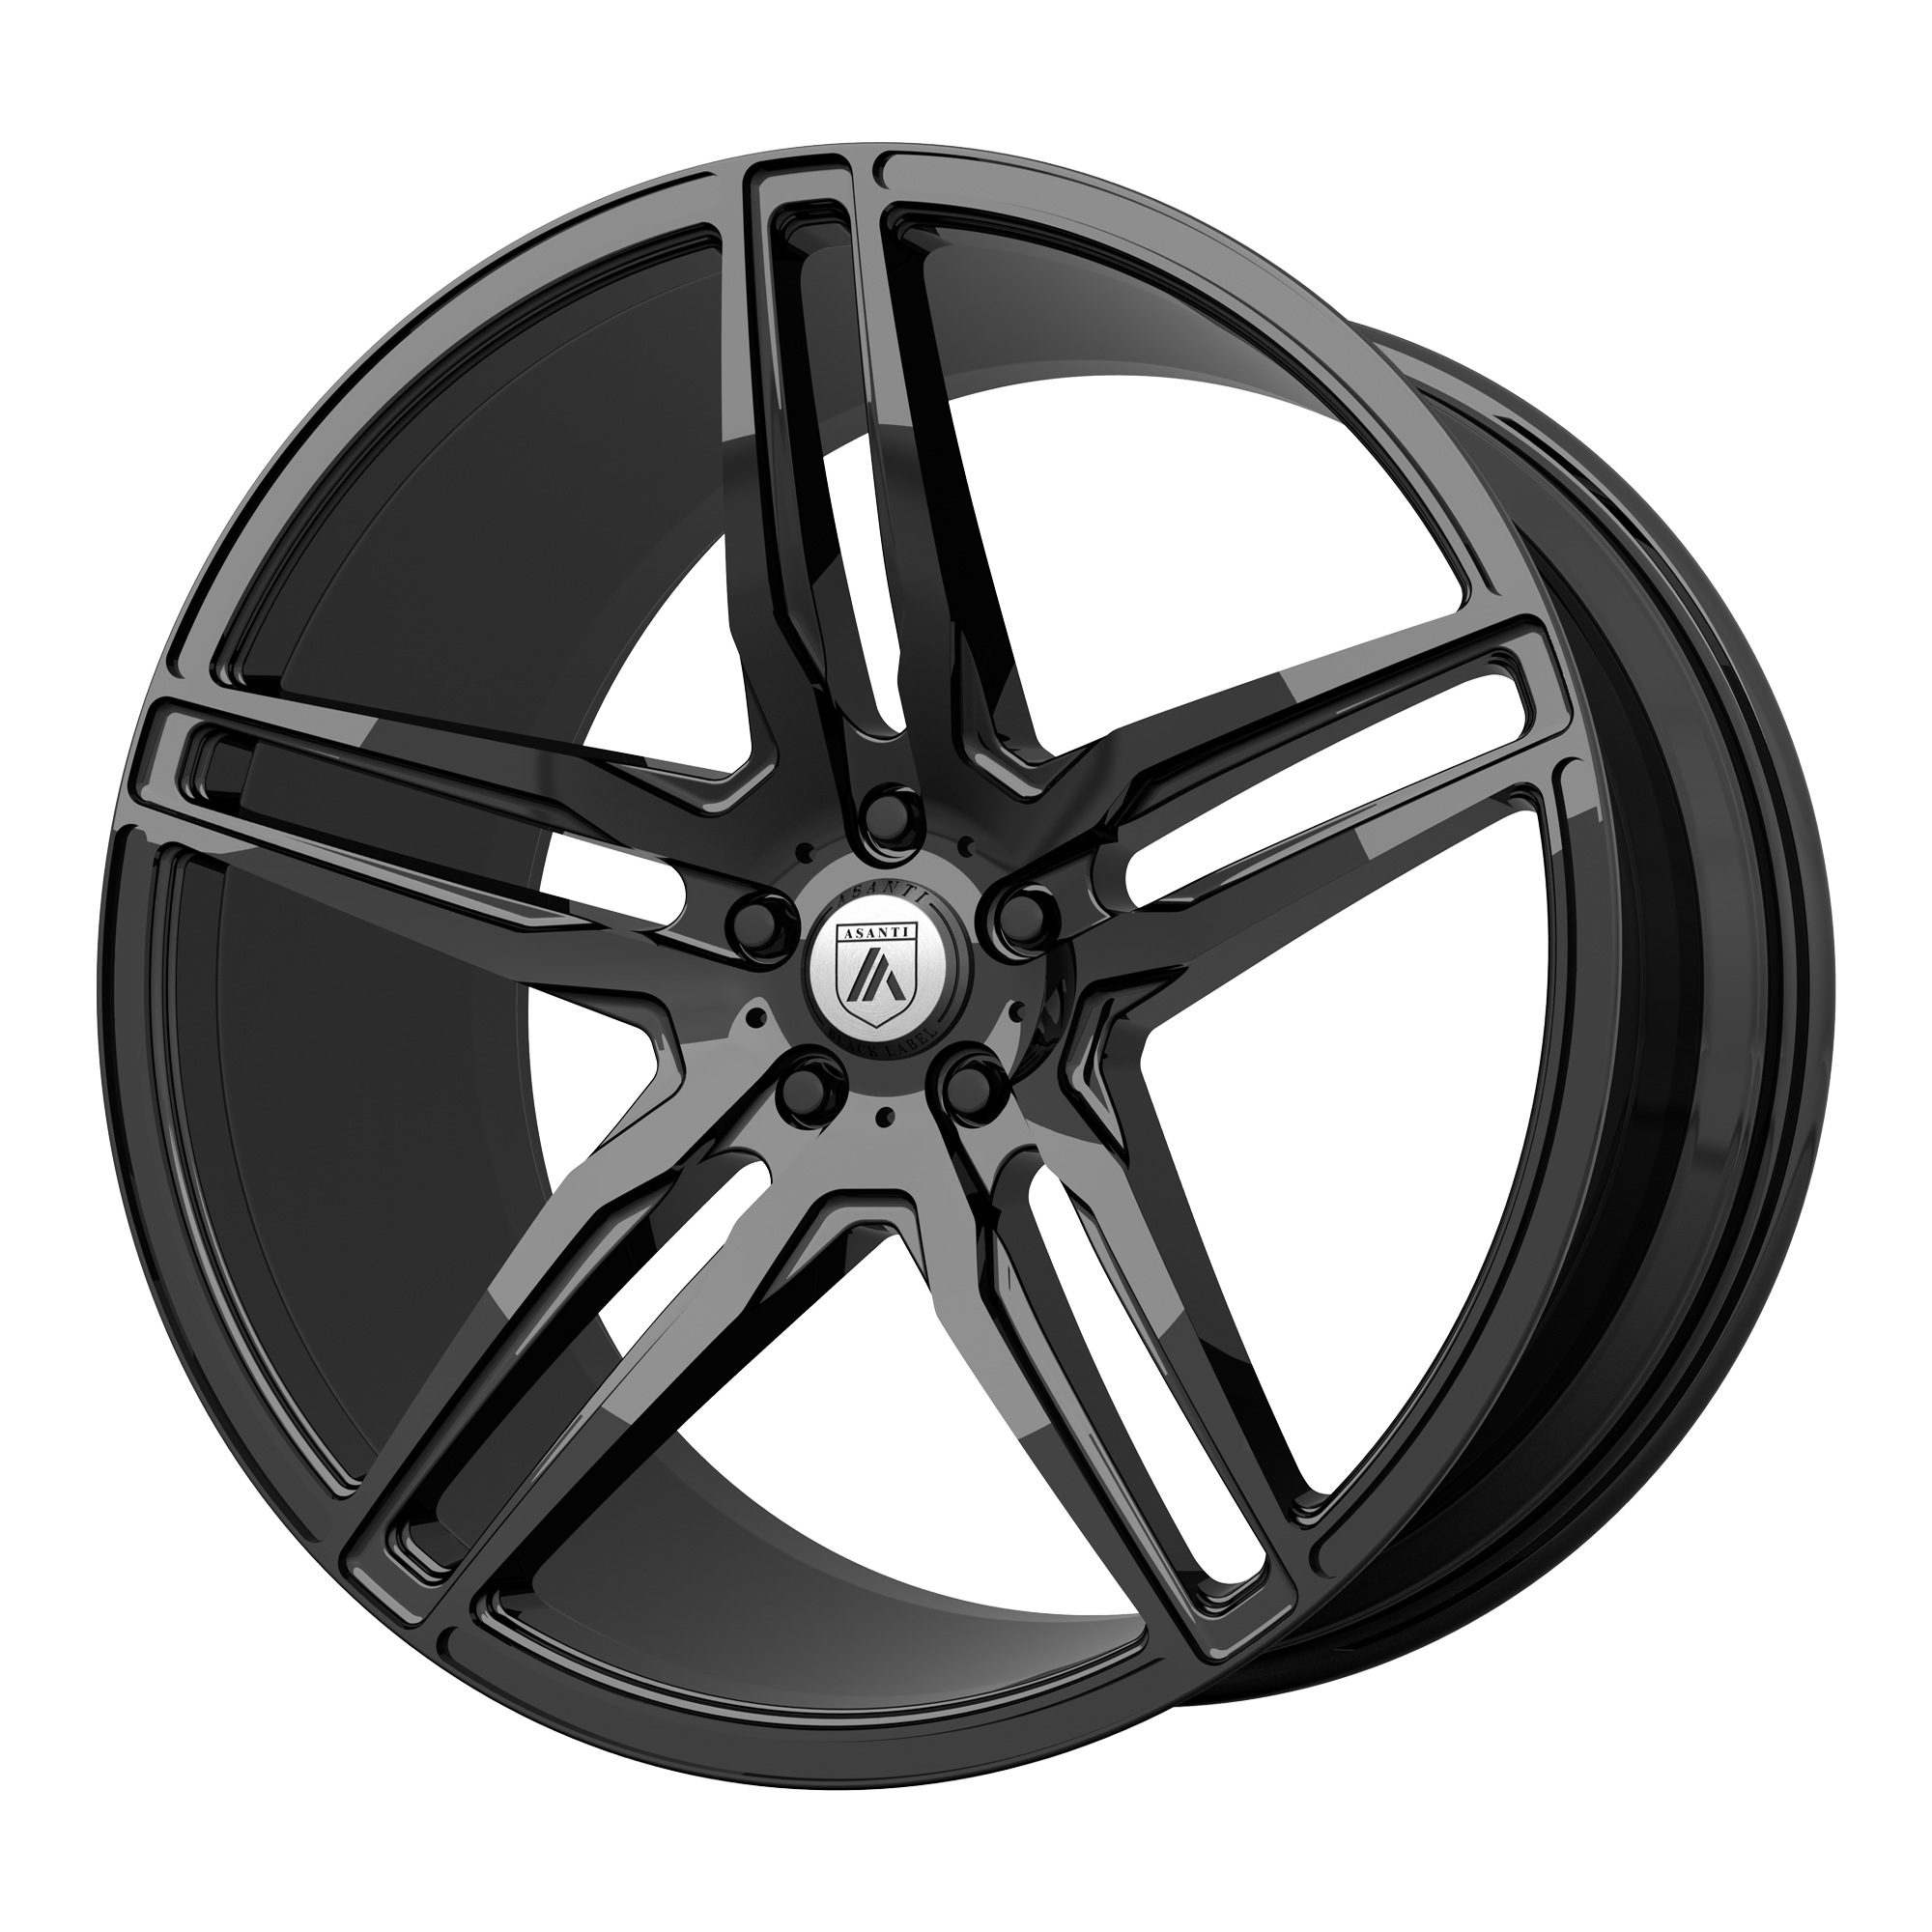 ORION 22x9 5x115.00 GLOSS BLACK (15 mm) - Tires and Engine Performance